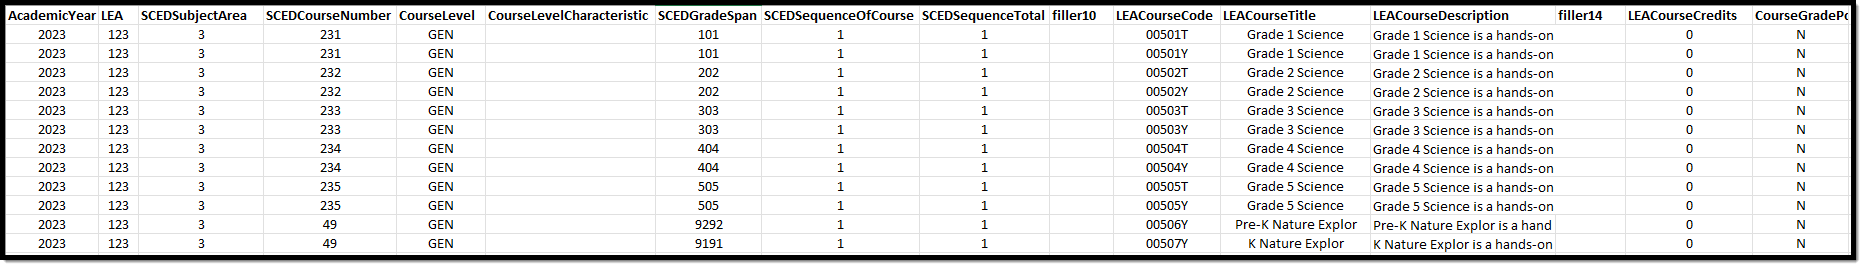 Image of the Course Catalog Extract in CSV format.